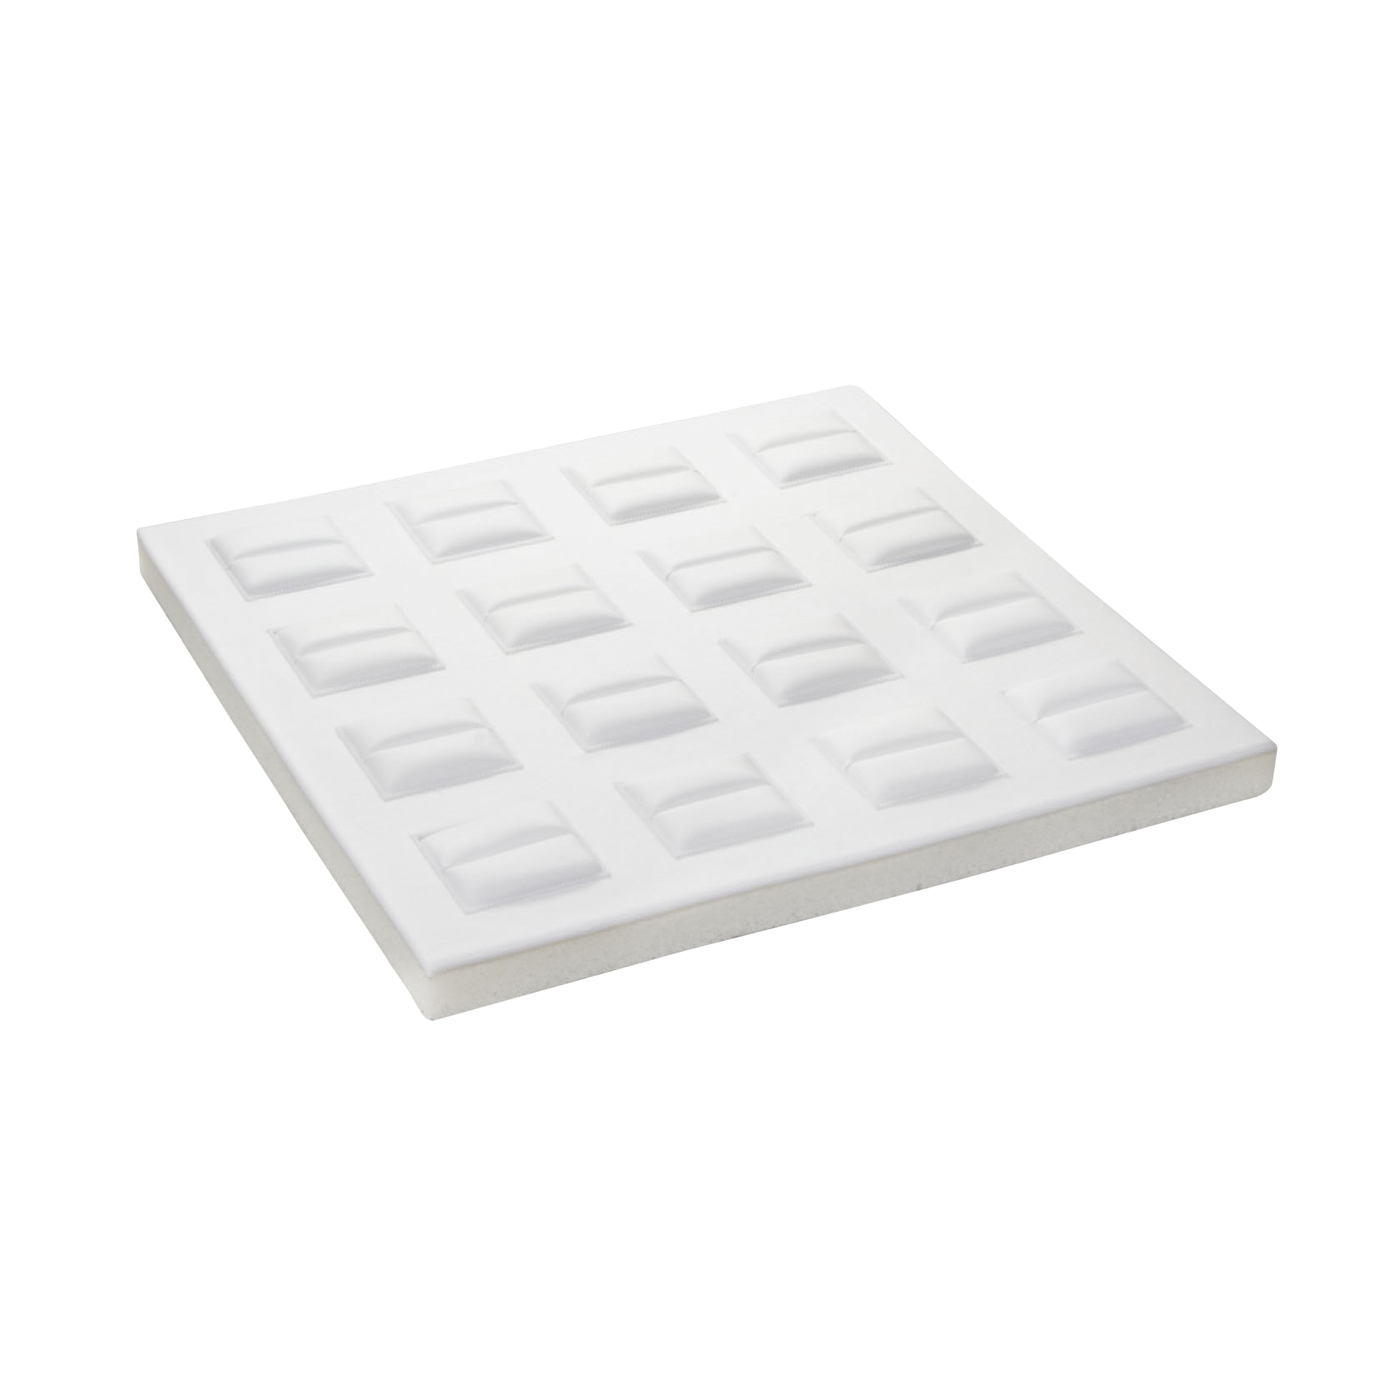 Tray System Inlay, White, for 16 Rings, 224 x 224 mm - 1 piece